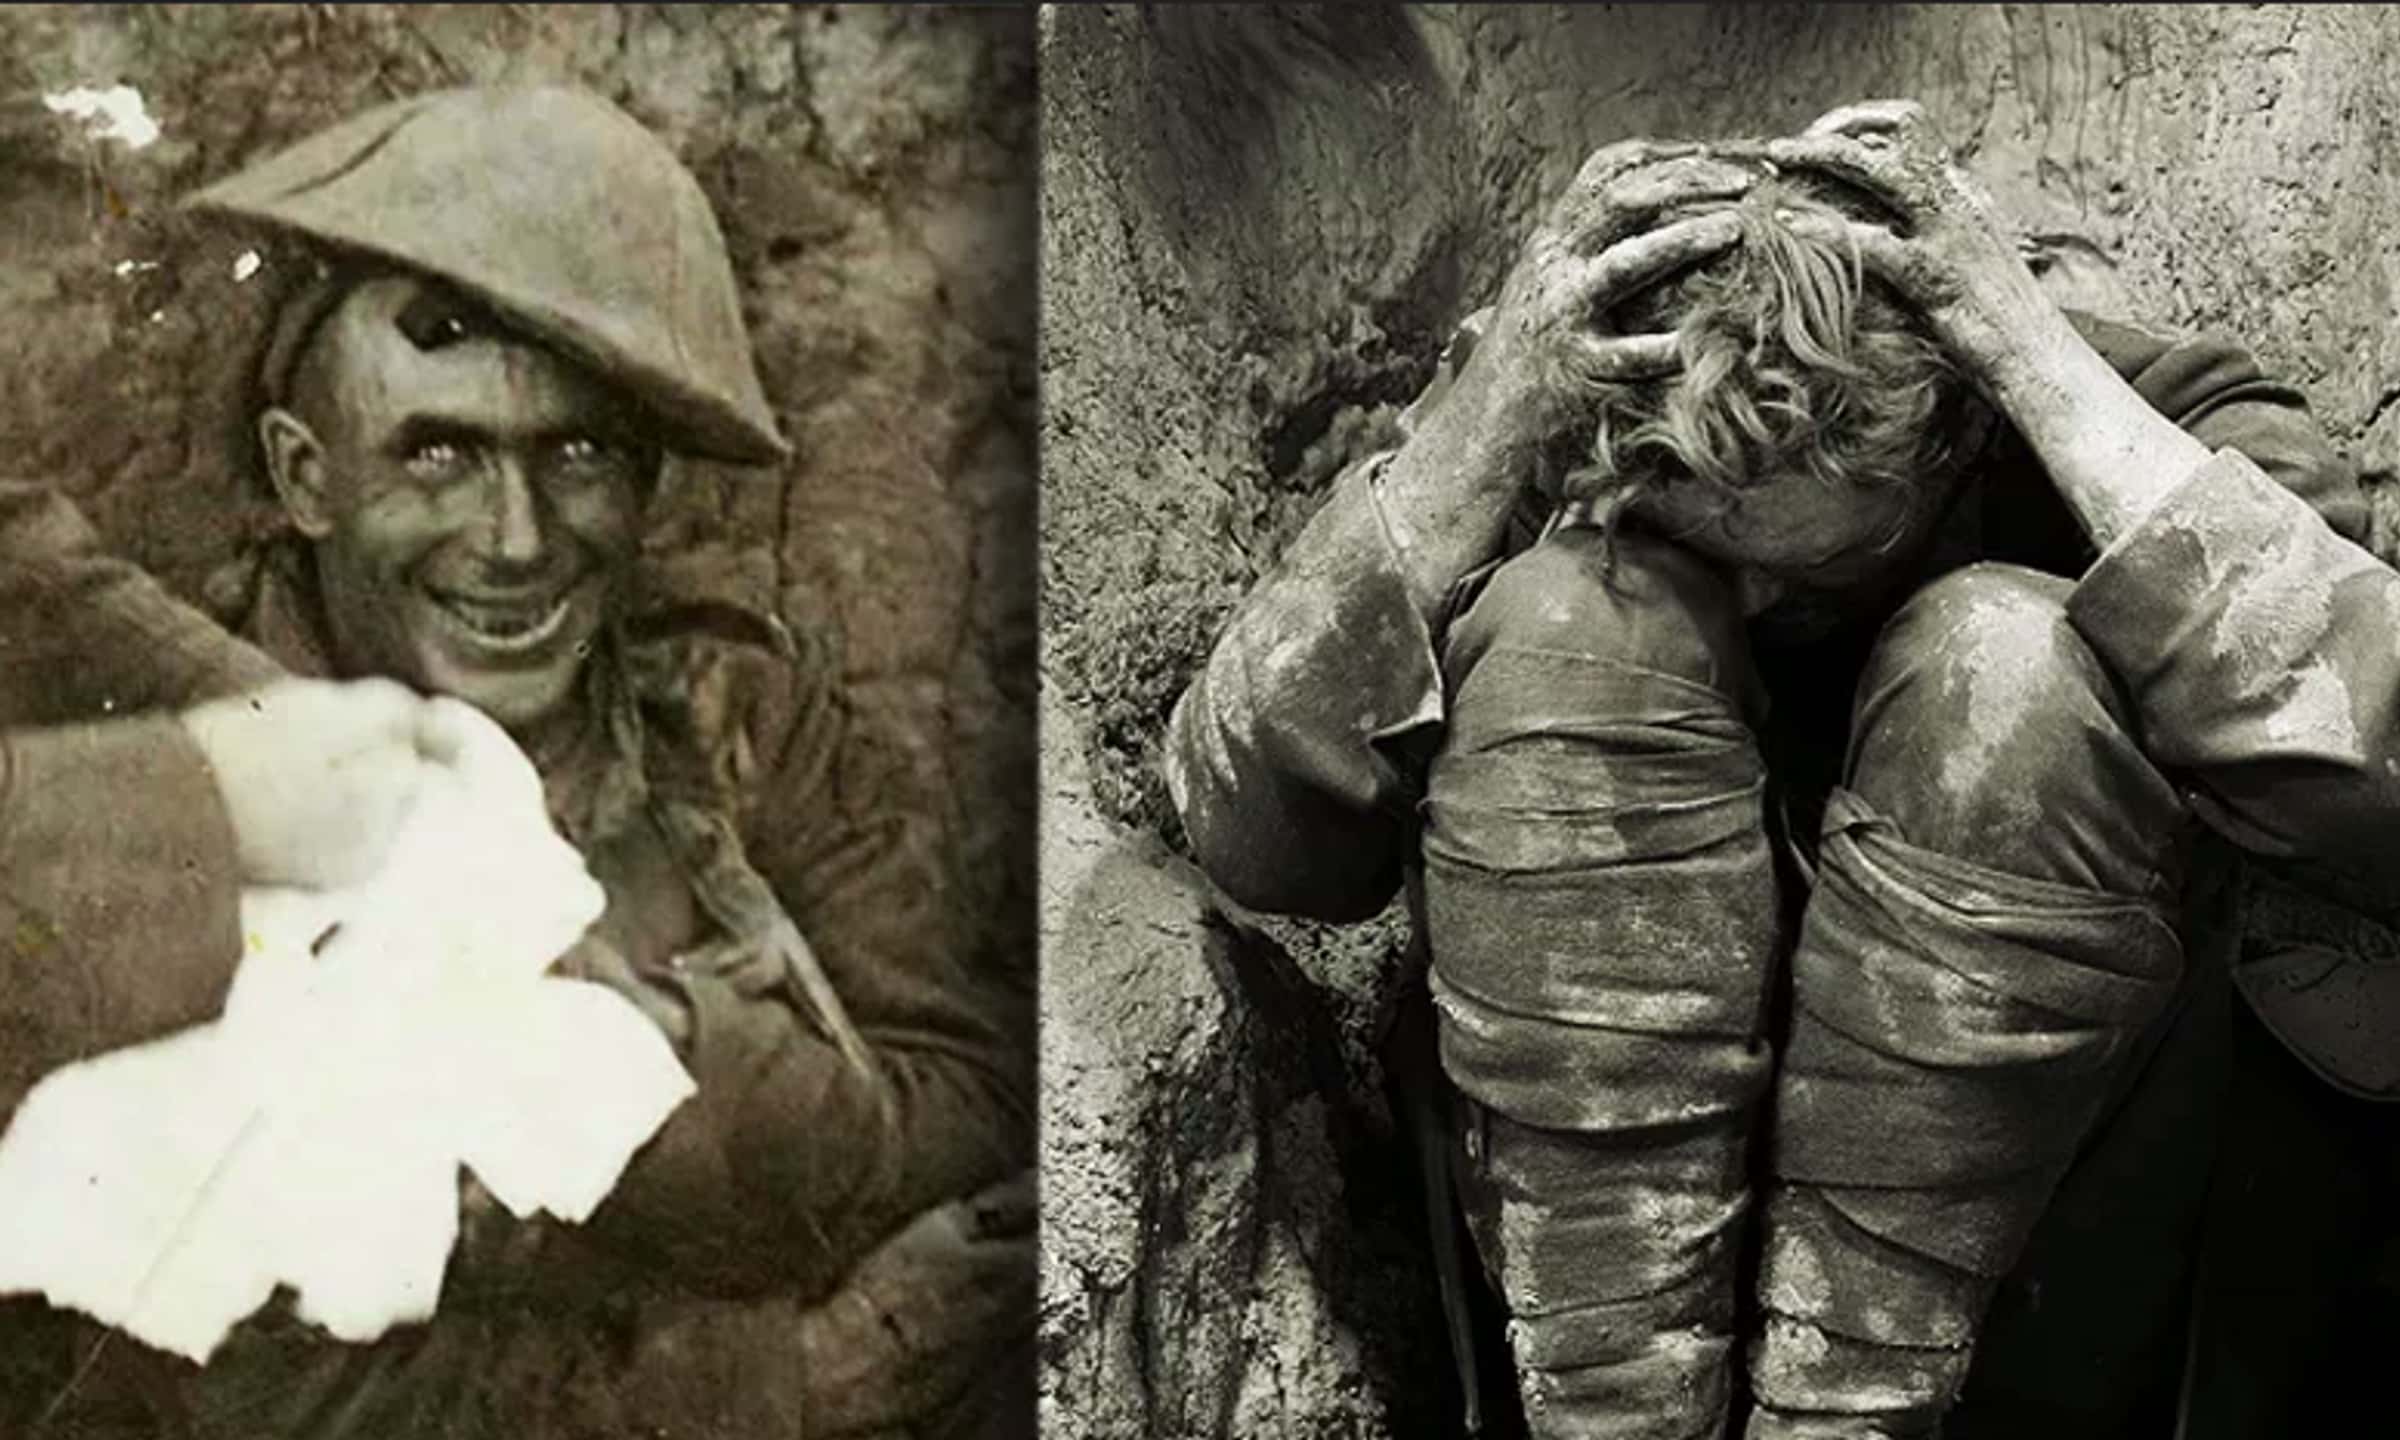 photos of soldiers with shell shock